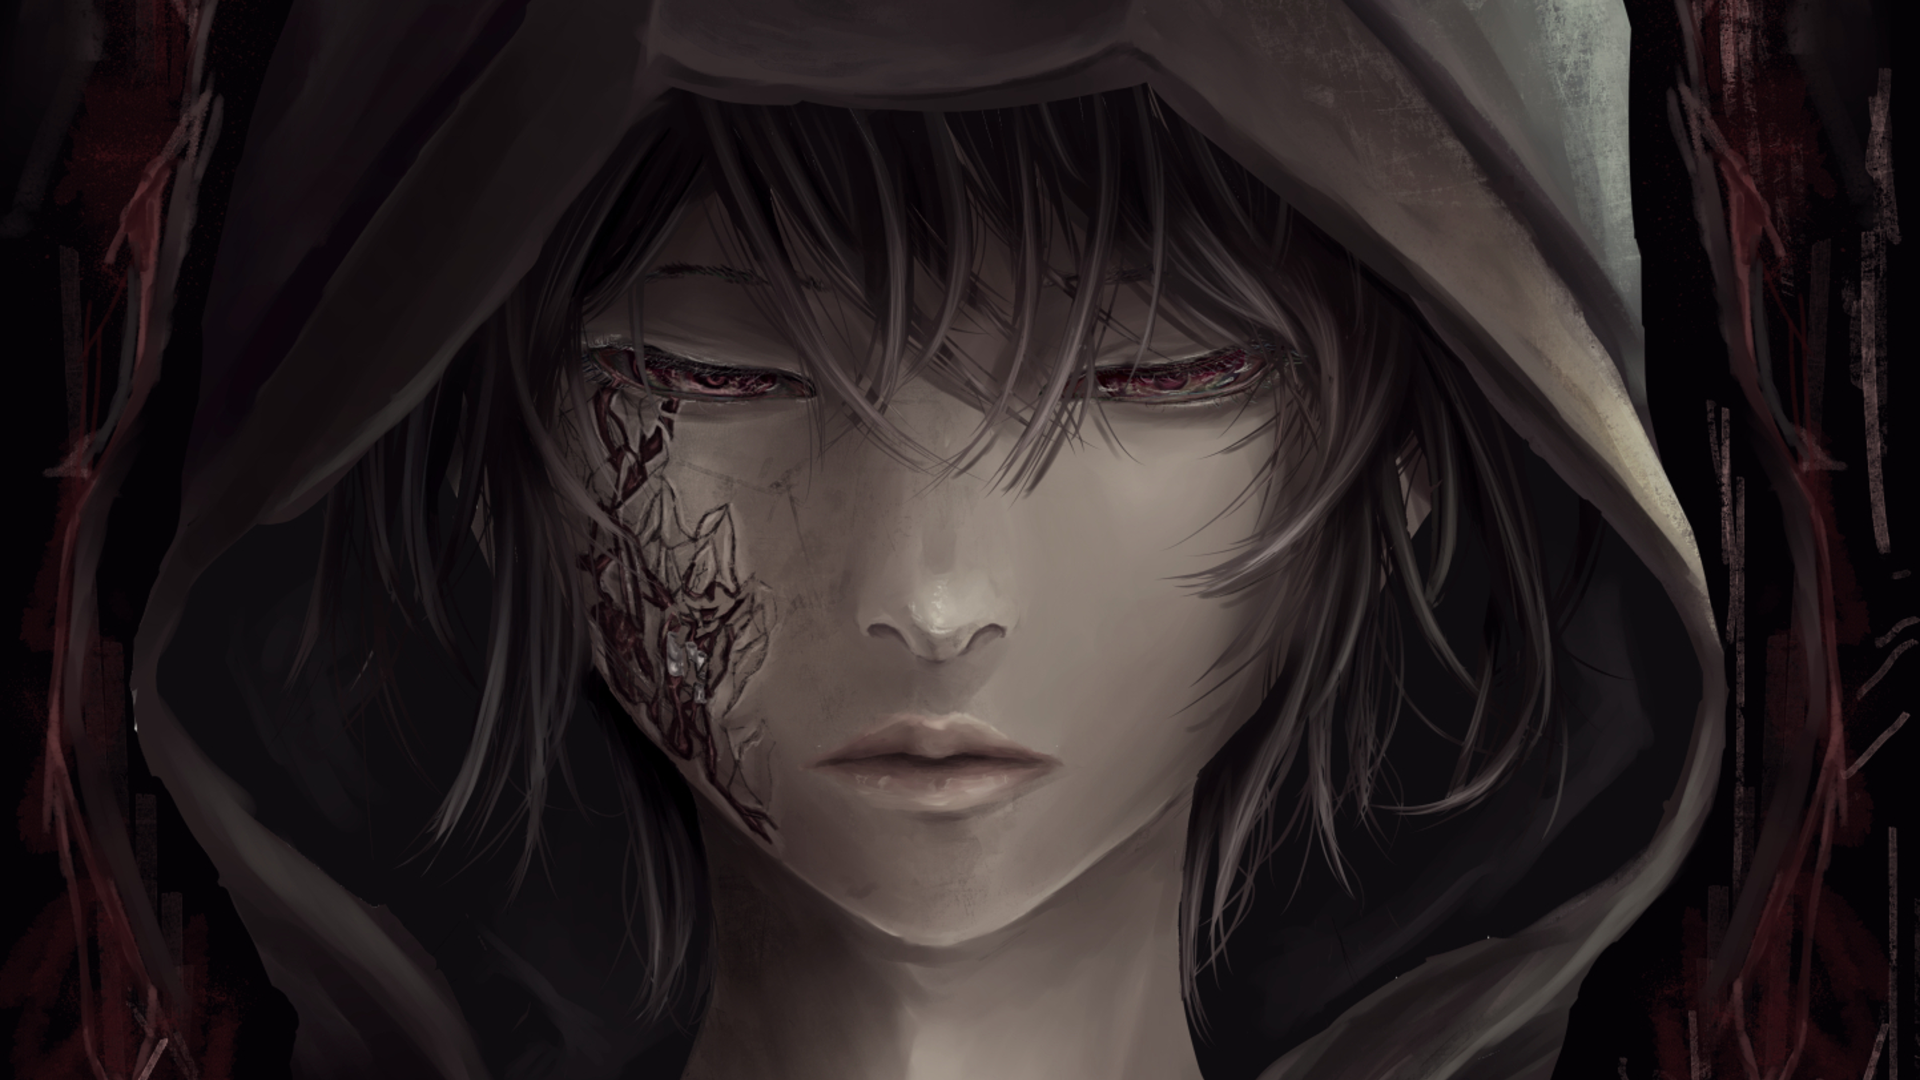 Hooded Sad Anime Boy Wallpapers - Wallpaper Cave